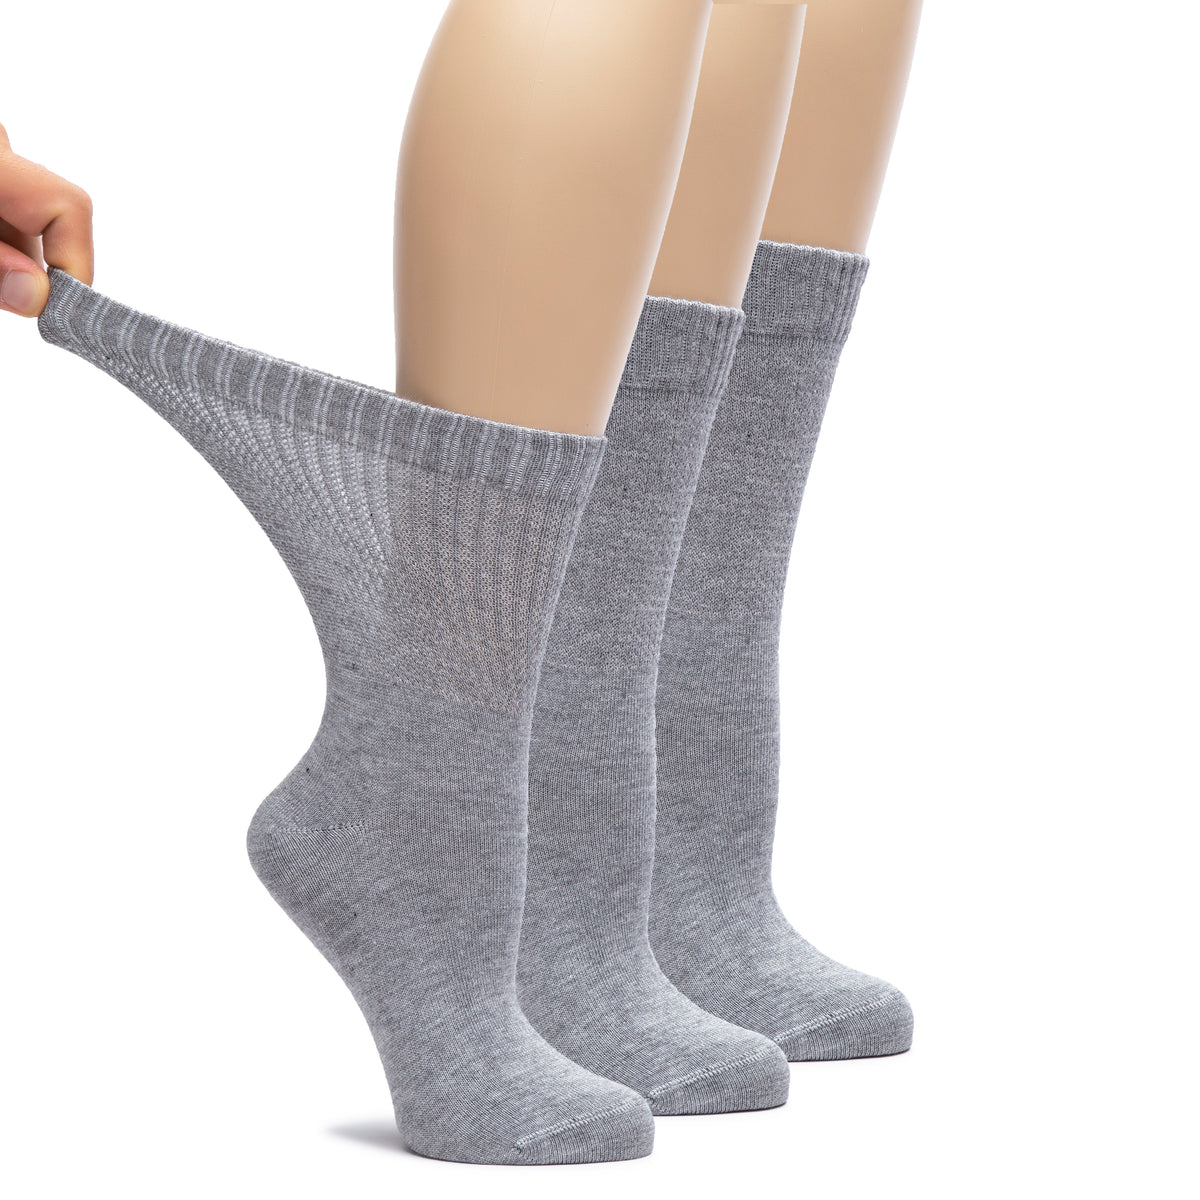  A trio of women's Bamboo Diabetic Crew Socks, each pair with one leg lifted, showcasing their soft and comfortable design.